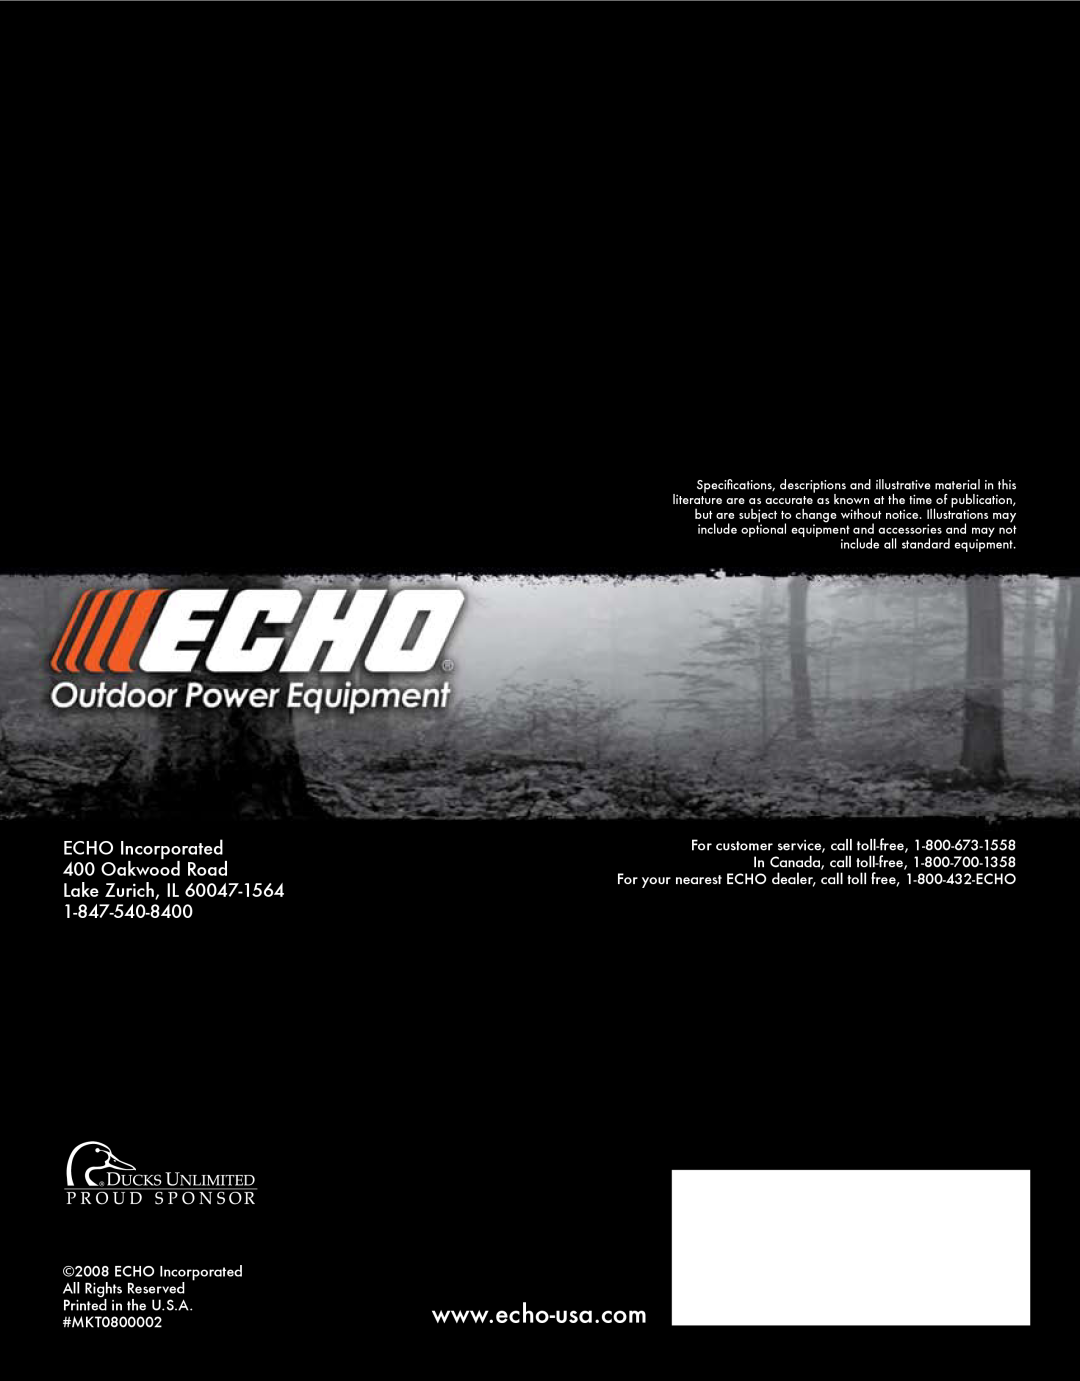 Echo HV-110XG manual ECHO Incorporated 400 Oakwood Road Lake Zurich, IL 60047-1564, ECHO Incorporated All Rights Reserved 